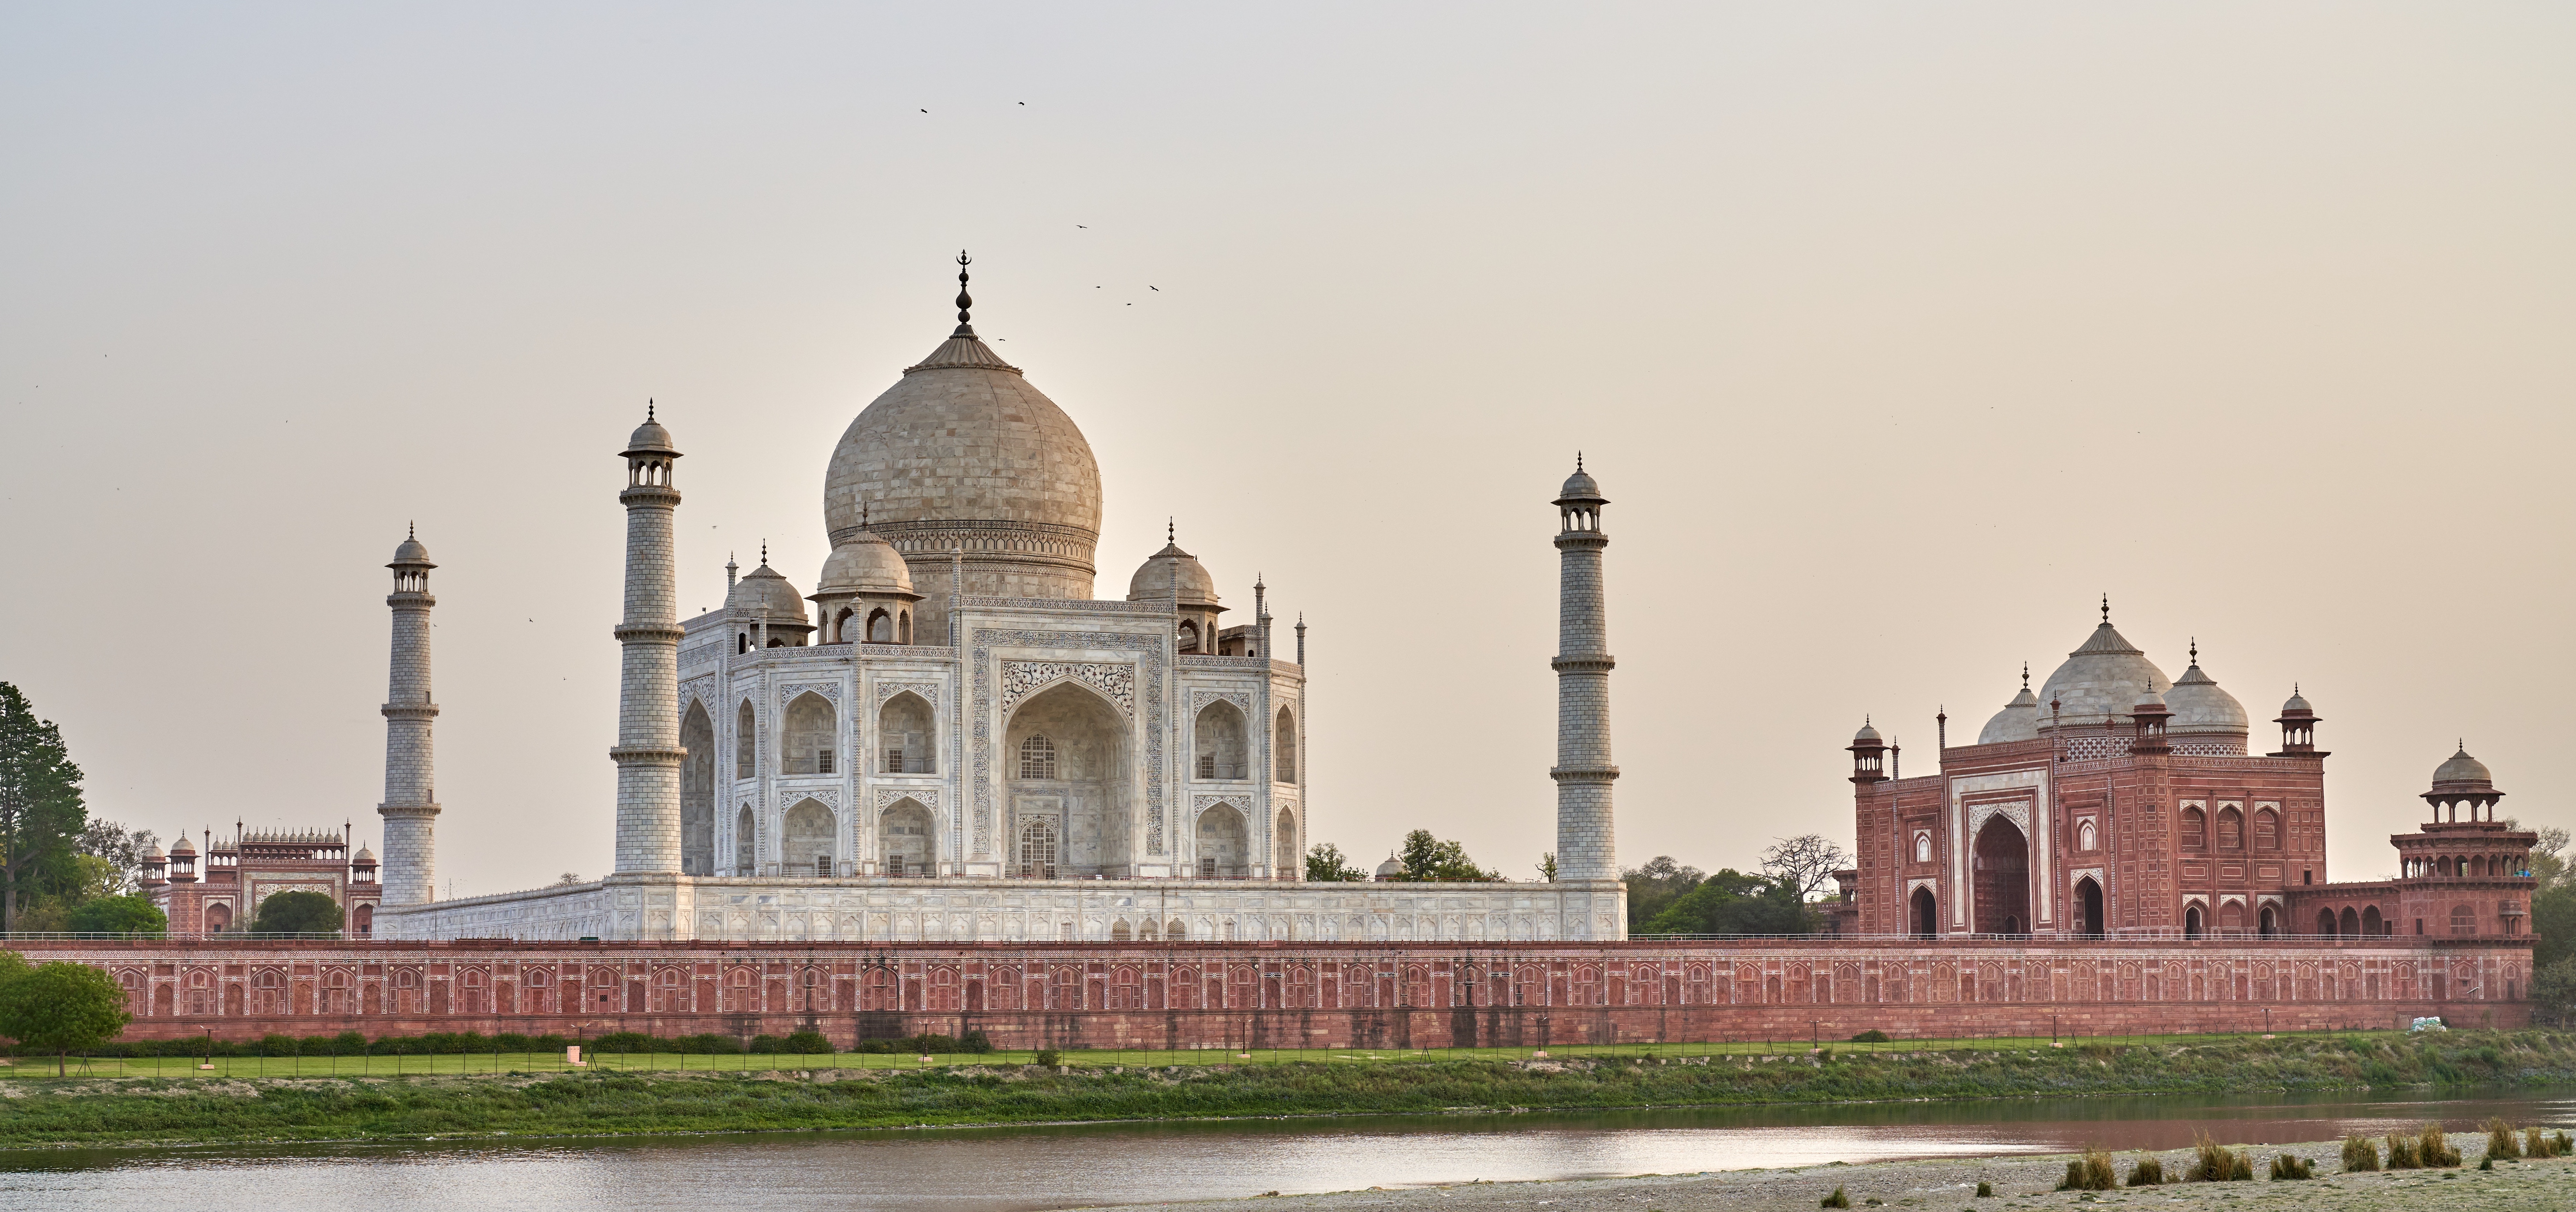 WOW air Launches Routes To India With $199 Flights